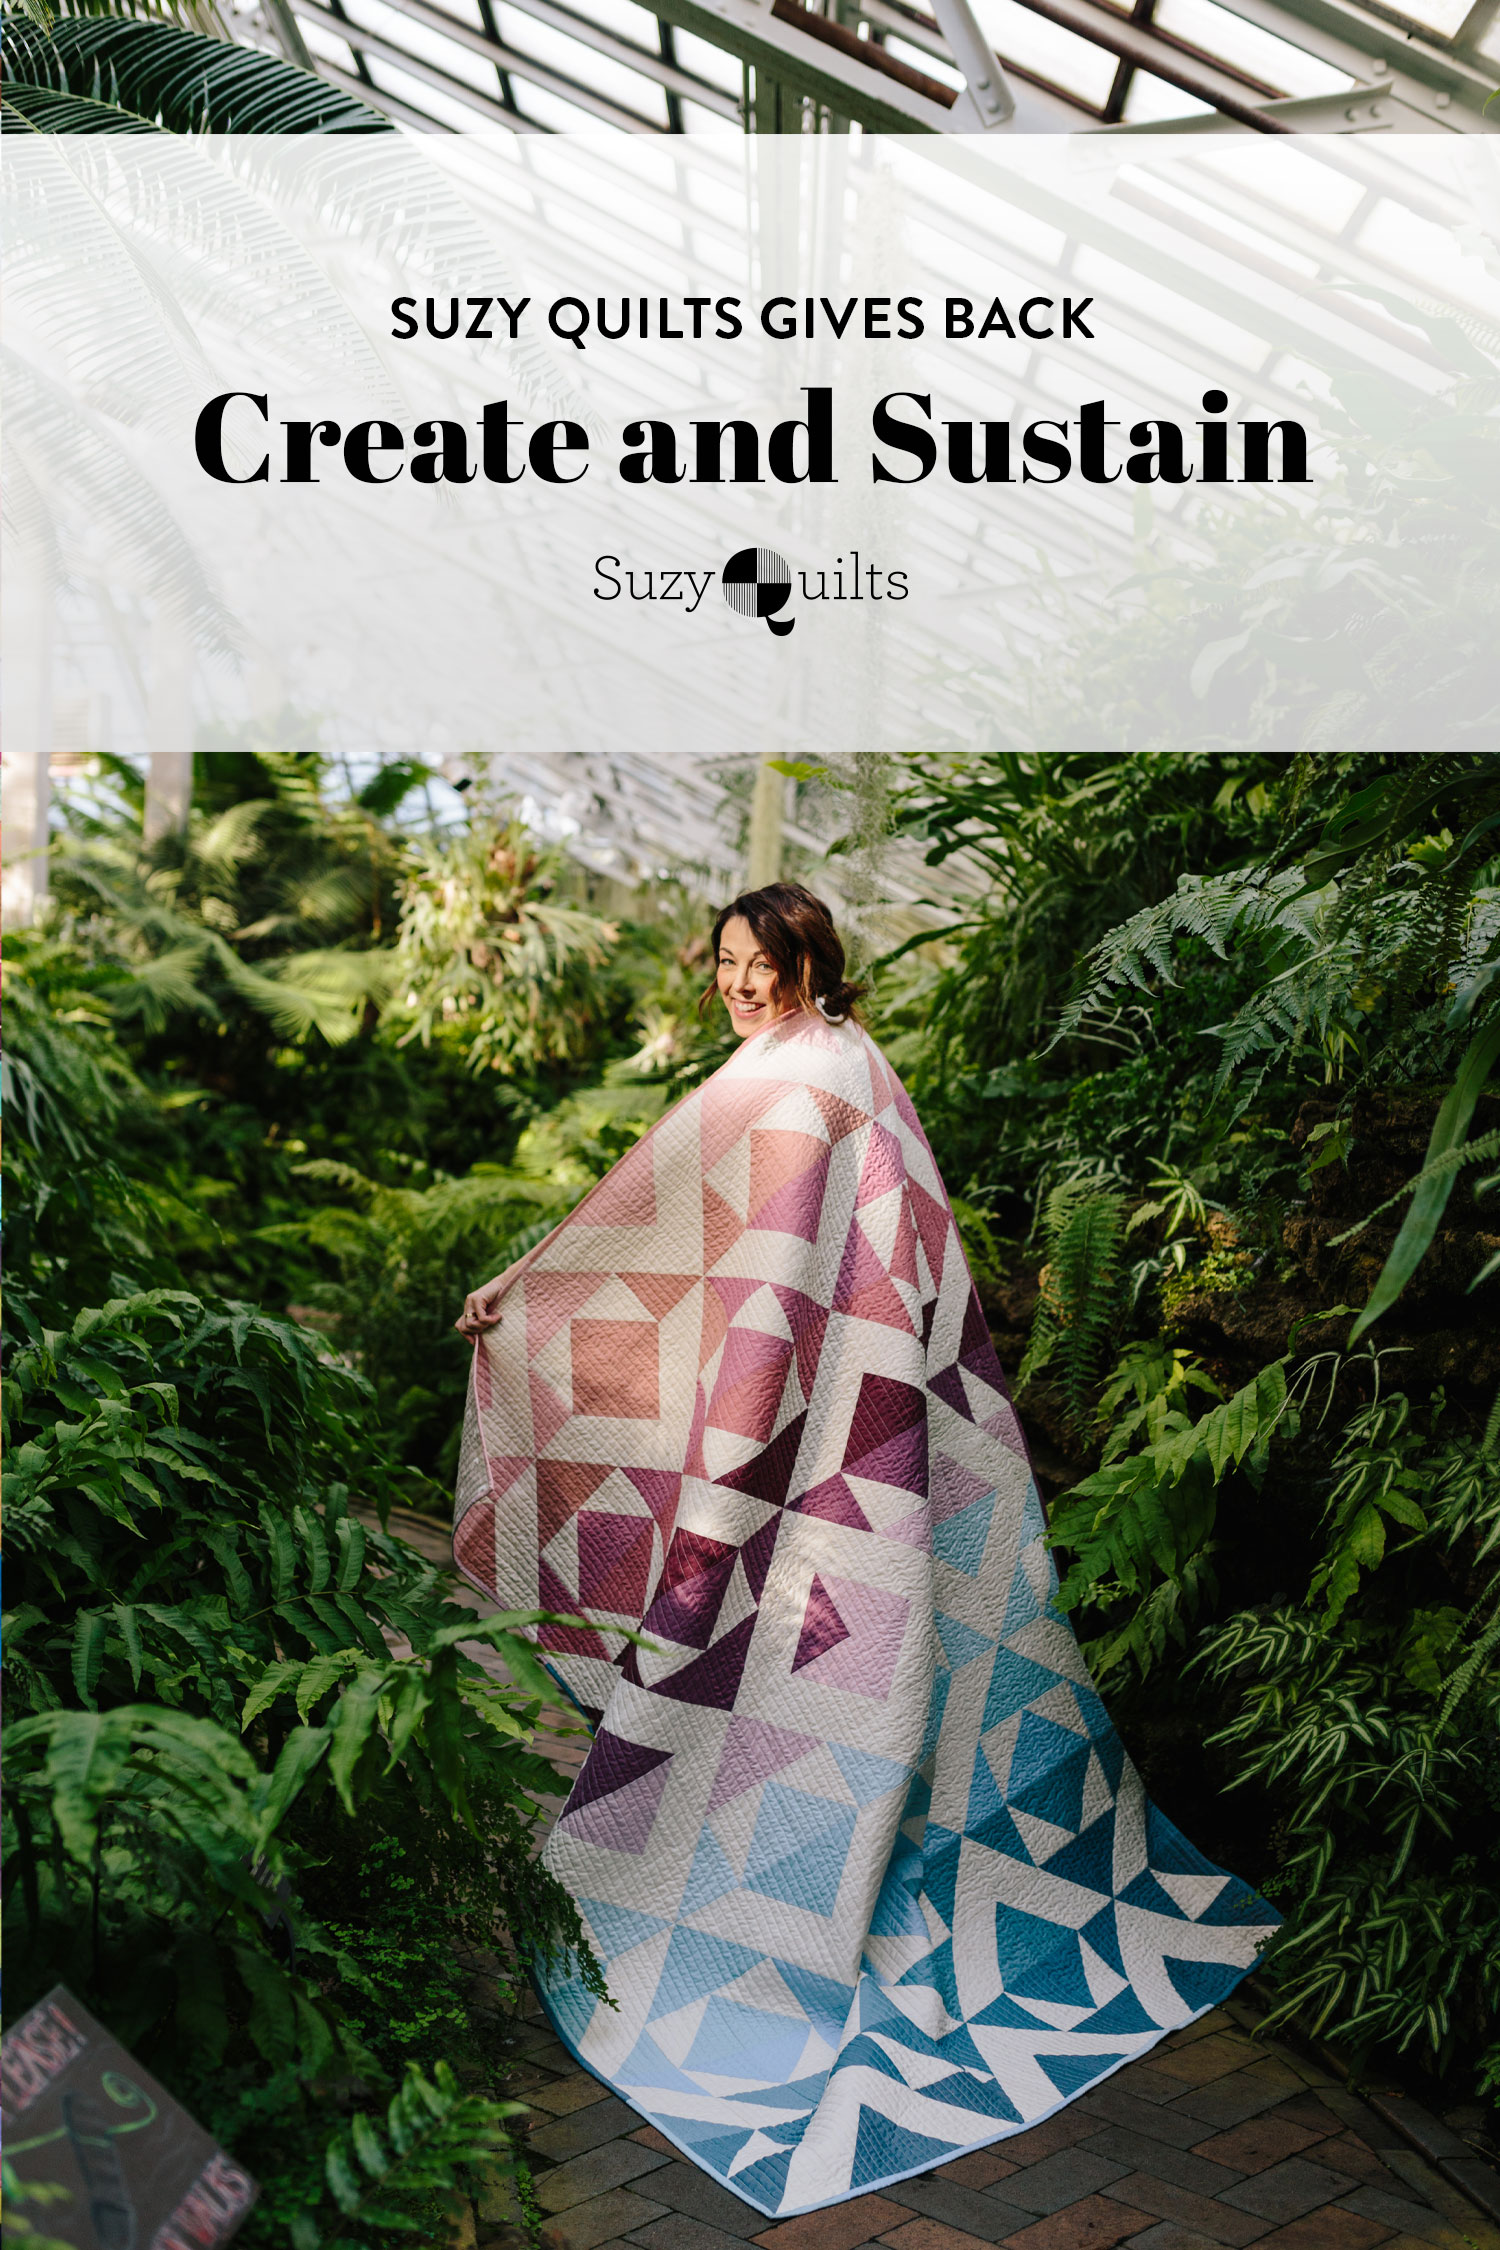 Learn about Create and Sustain, a new nonprofit dedicated to quilting sustainably in our Suzy Quilts Gives Back series! suzyquilts.com #quilting #sewing